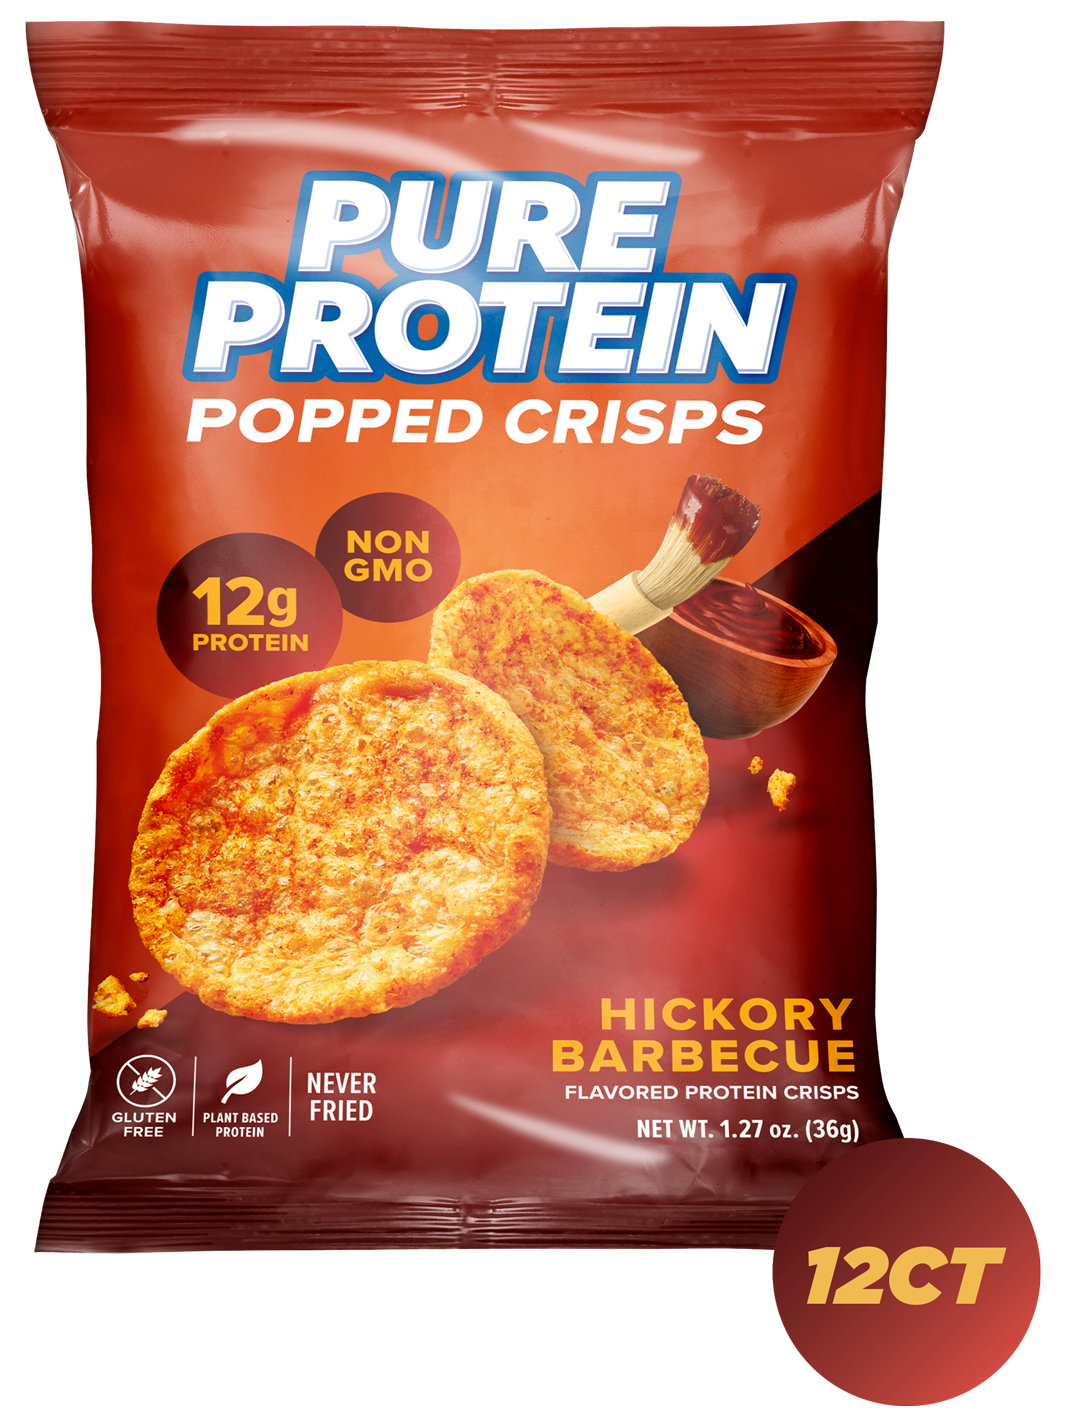 Hickory Barbecue Popped Crisps